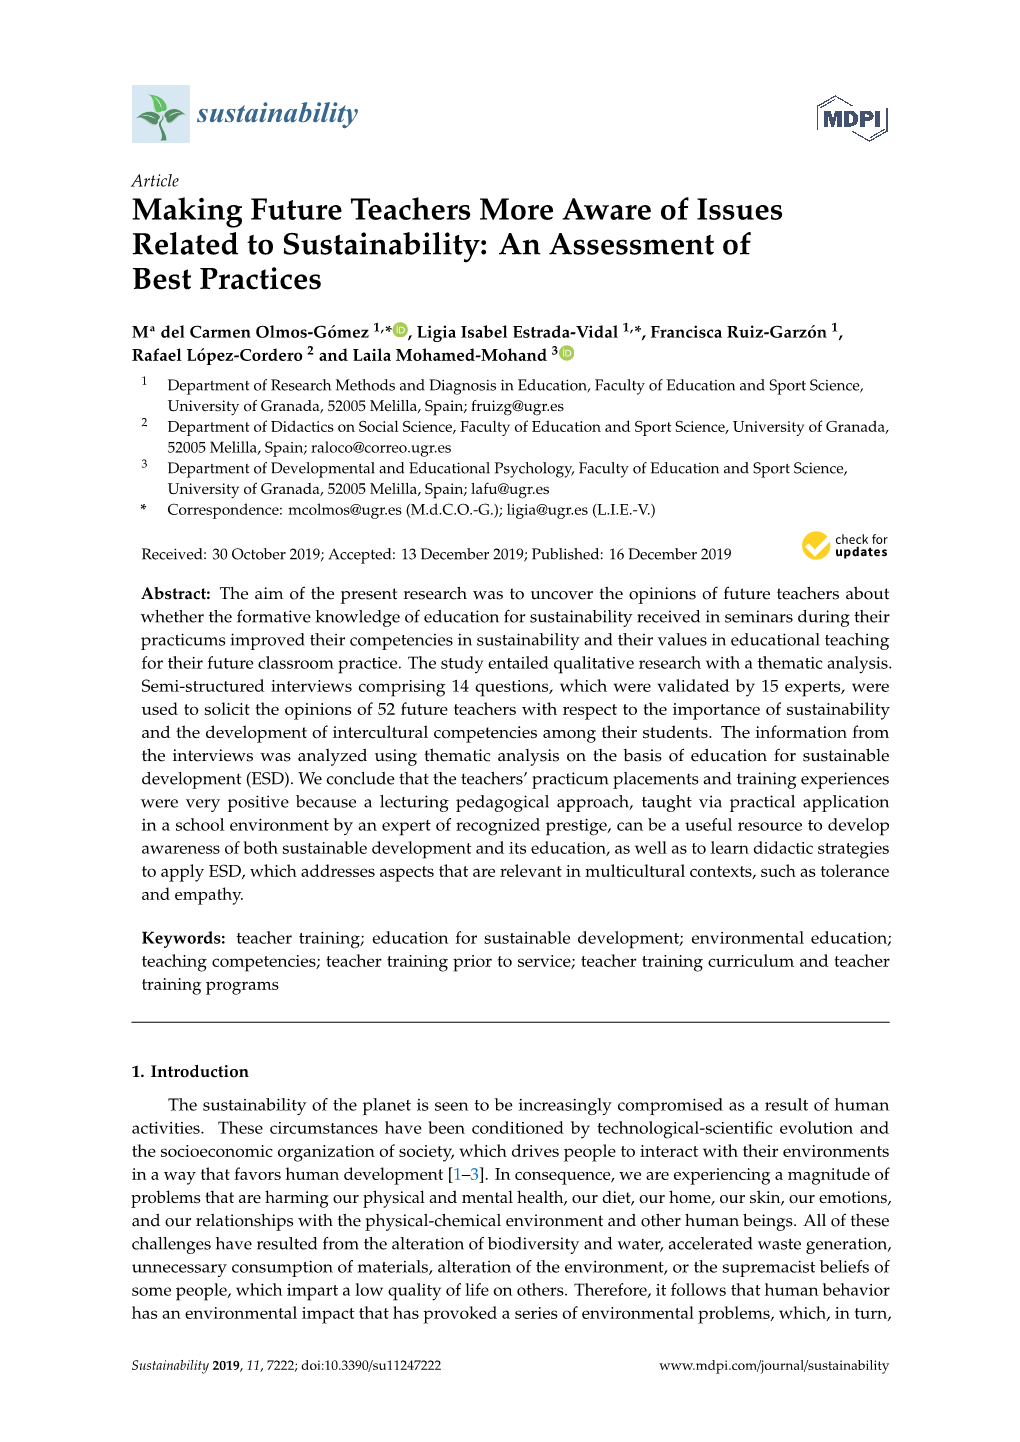 Making Future Teachers More Aware of Issues Related to Sustainability: an Assessment of Best Practices